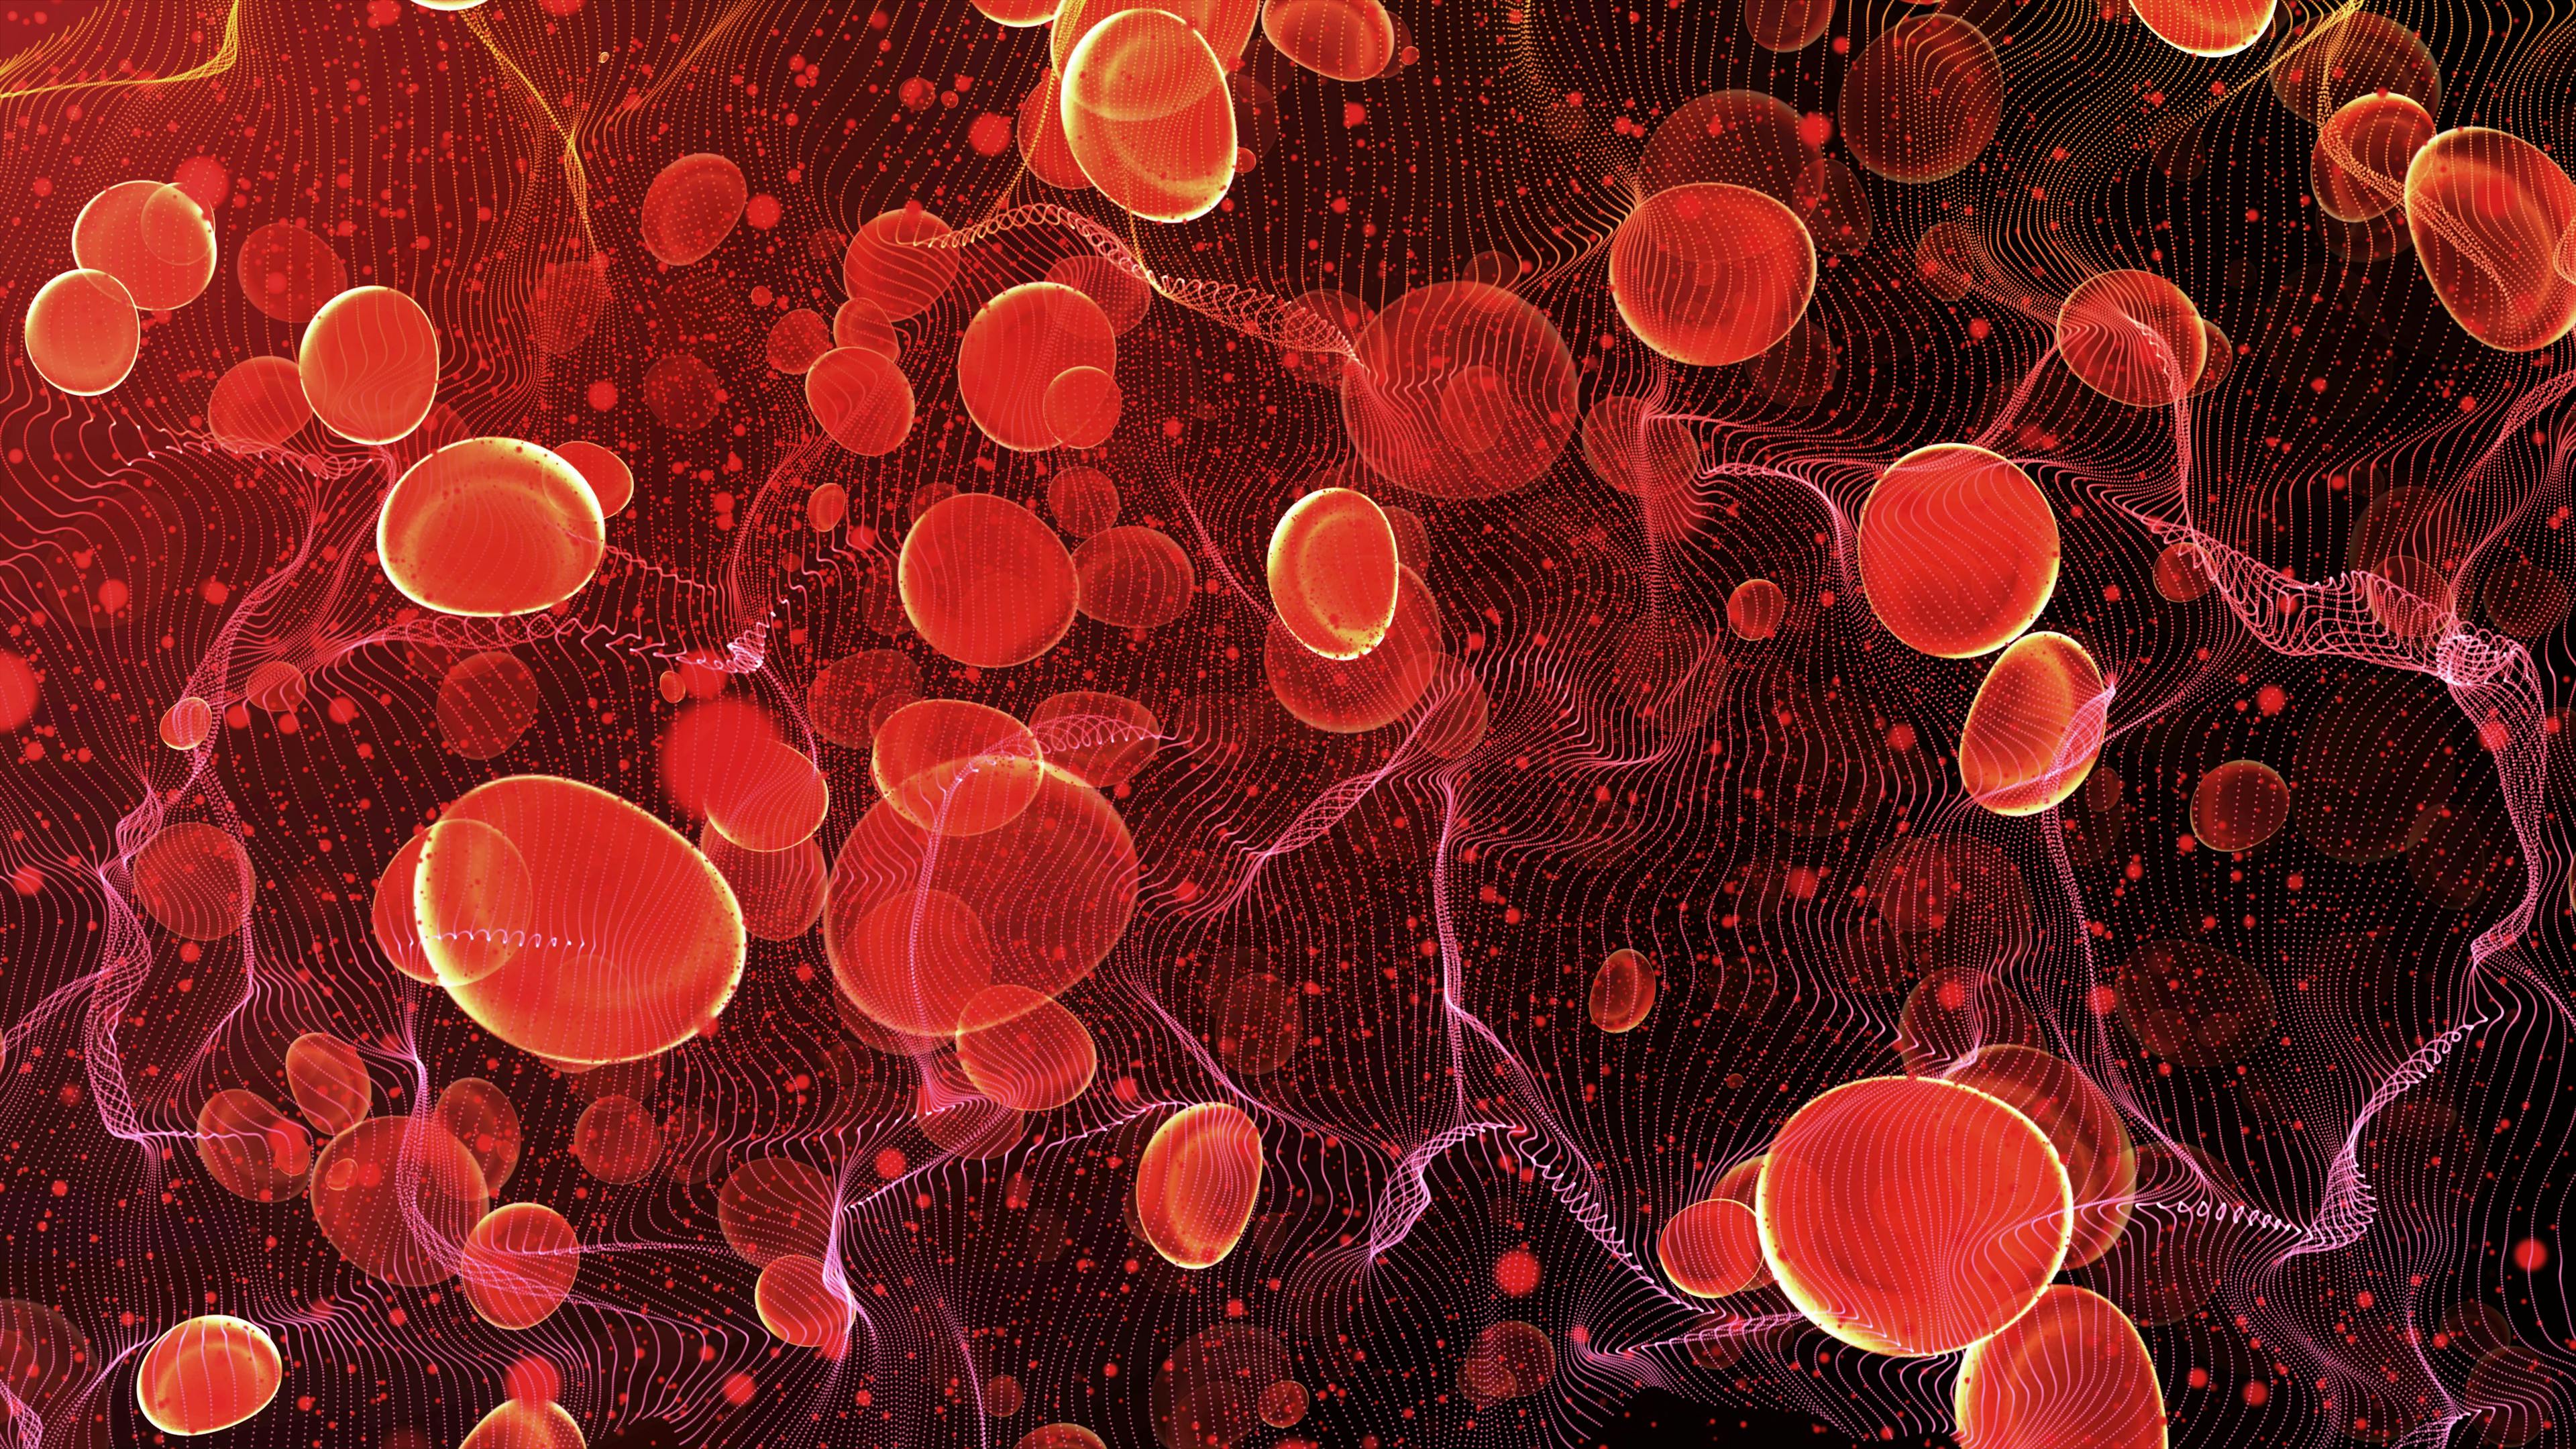 Red blood cells travel in an artery. Hematology, Lymphoma. | Image Credit: DIgilife - stock.adobe.com